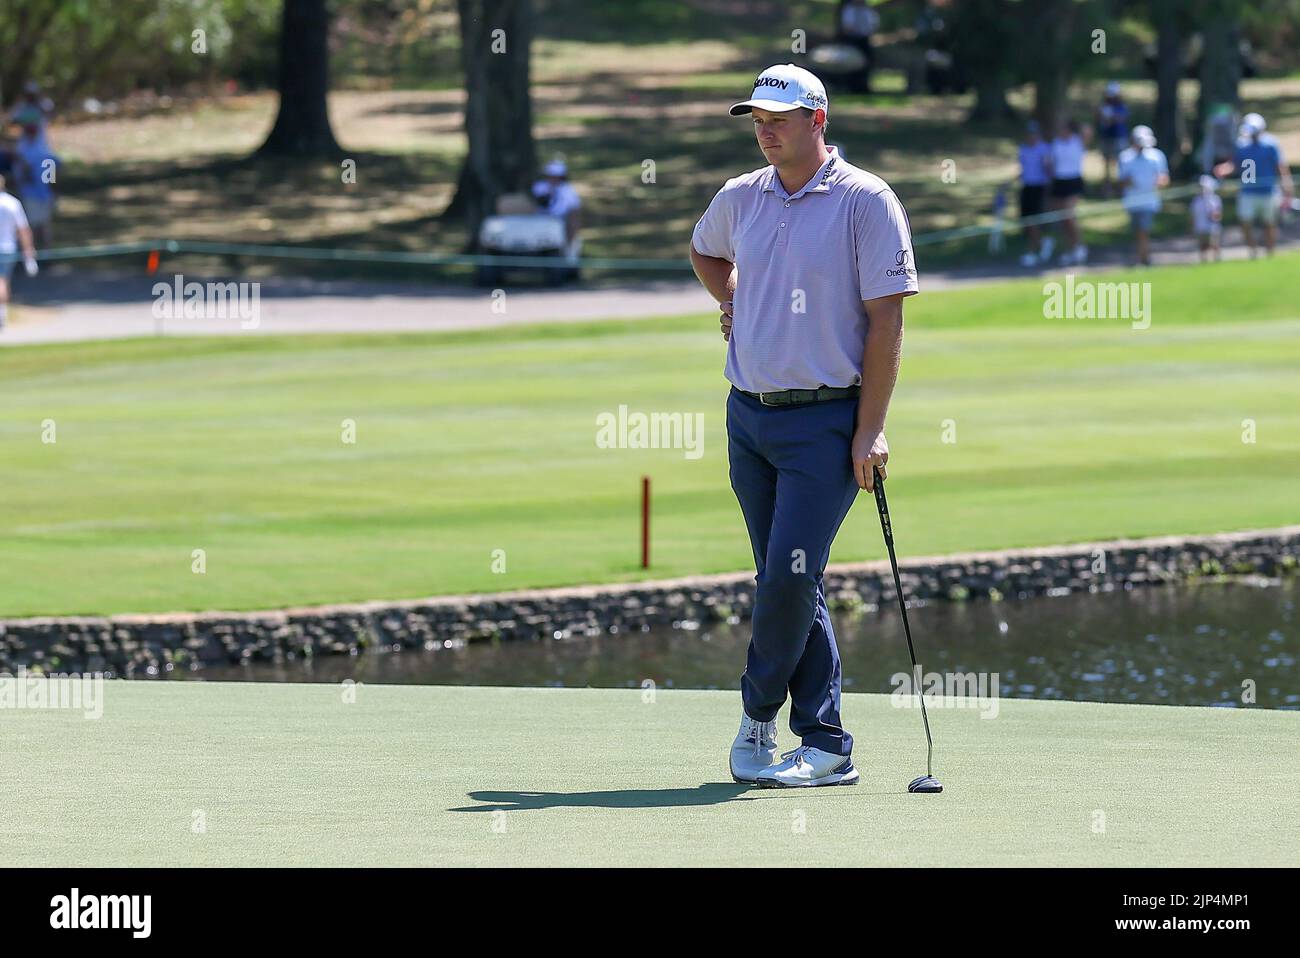 August 14, 2022: Sepp Straka during the final round of the FedEx St. Jude Championship golf tournament at TPC Southwind in Memphis, TN. Gray Siegel/Cal Sport Media Stock Photo